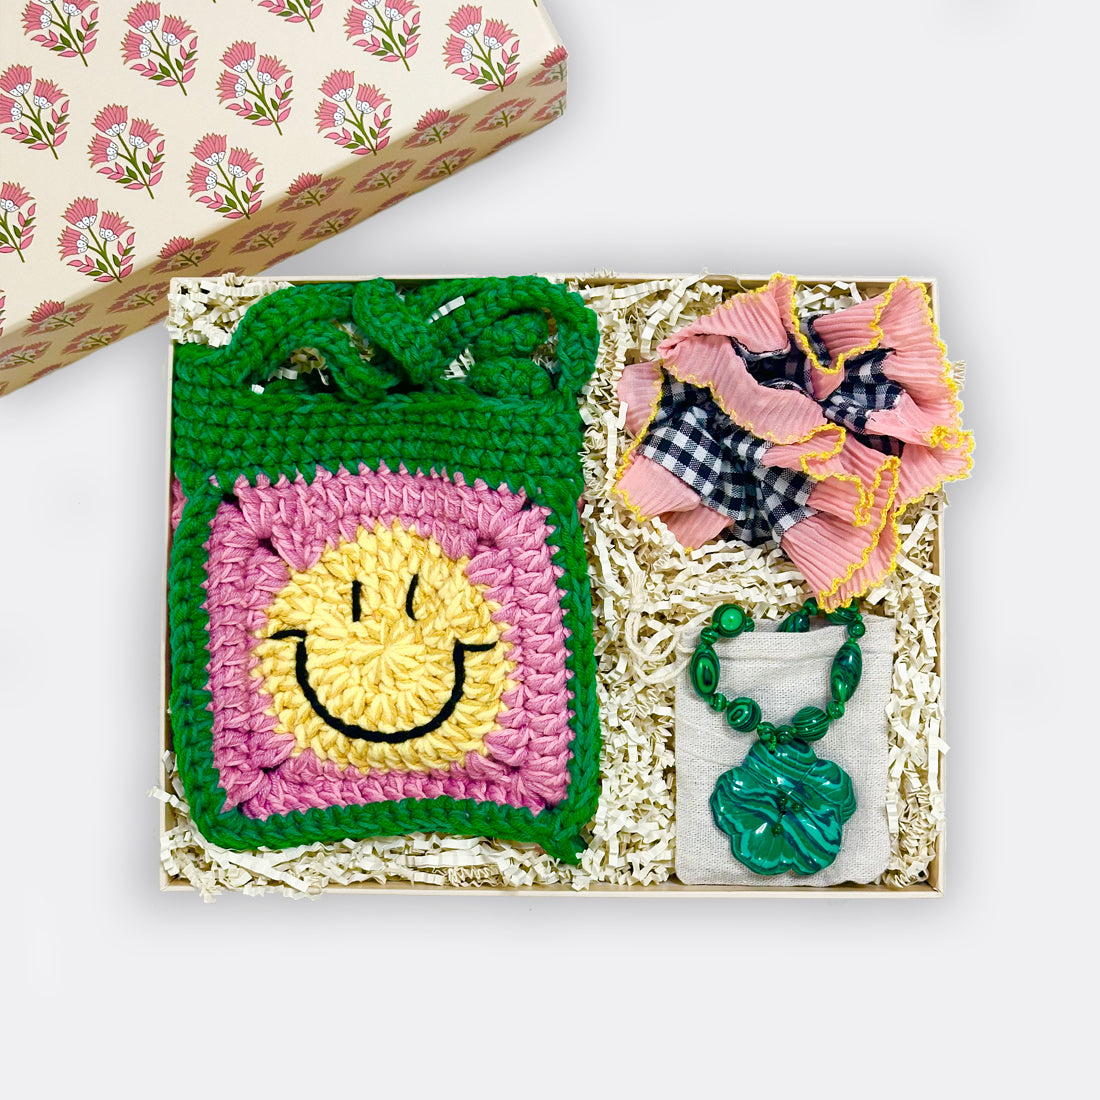 Smiley Satchel Bloom Necklace | Malachite Green Knitted Hair Scrunchy | Yellow, shop the best gift gifts for her for him from Inna carton online store dubai, UAE!